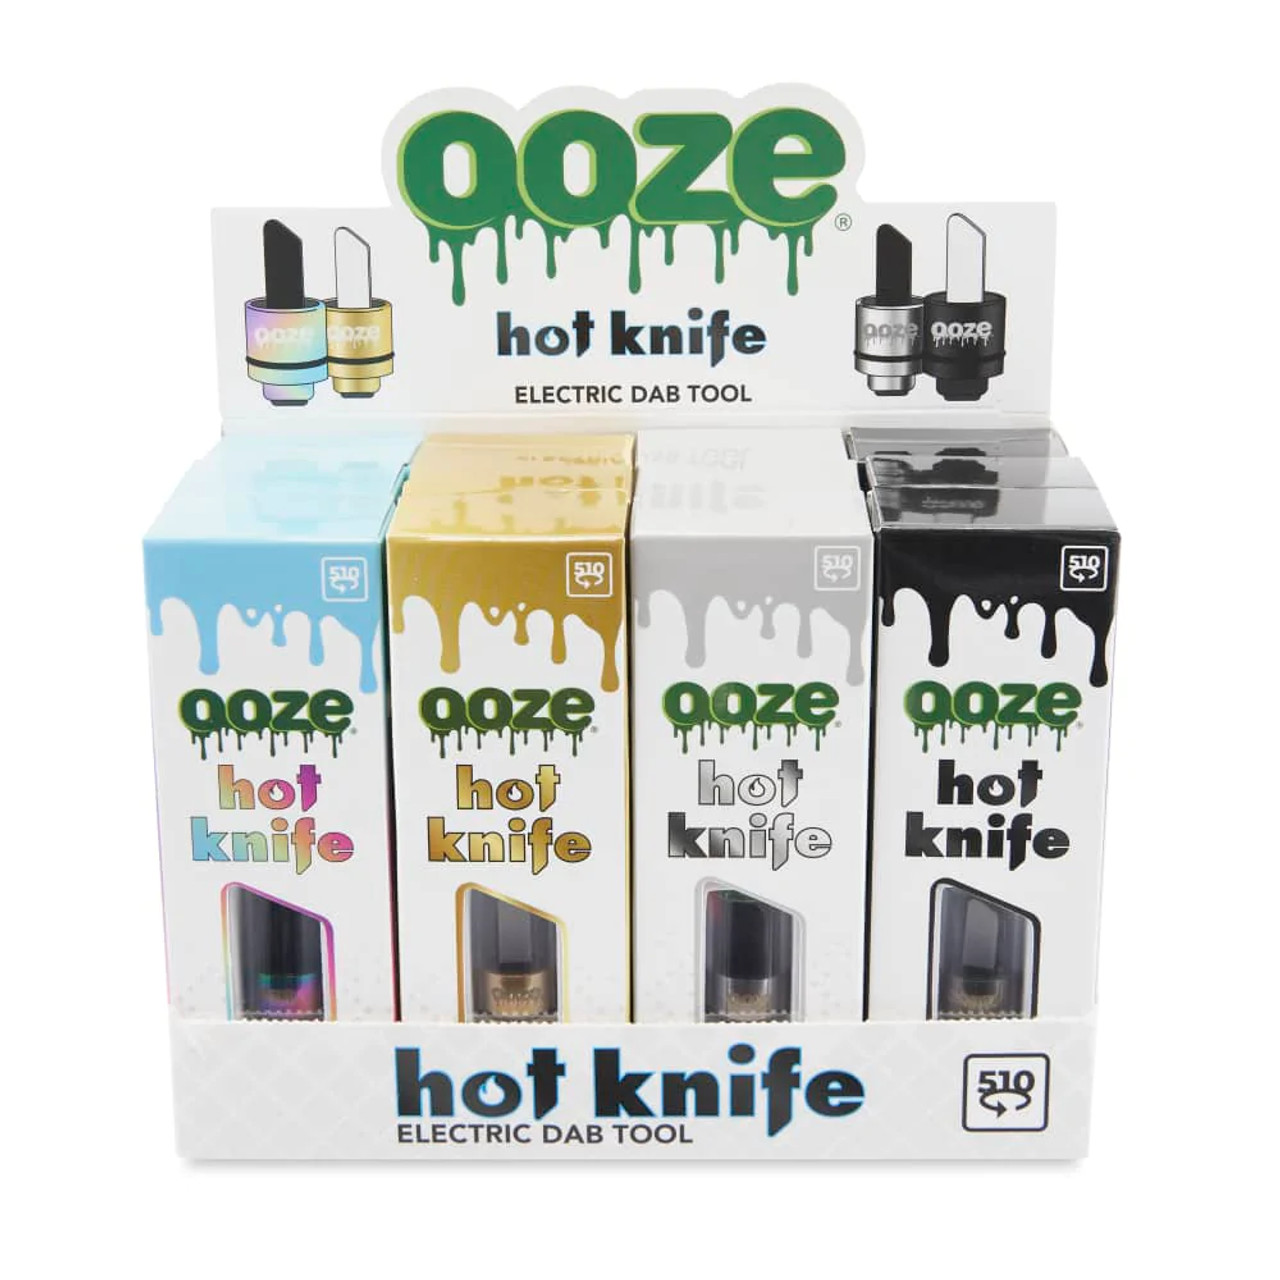 Our Spring Cleaning TipsFor Your Bong or Favorite Ooze Piece